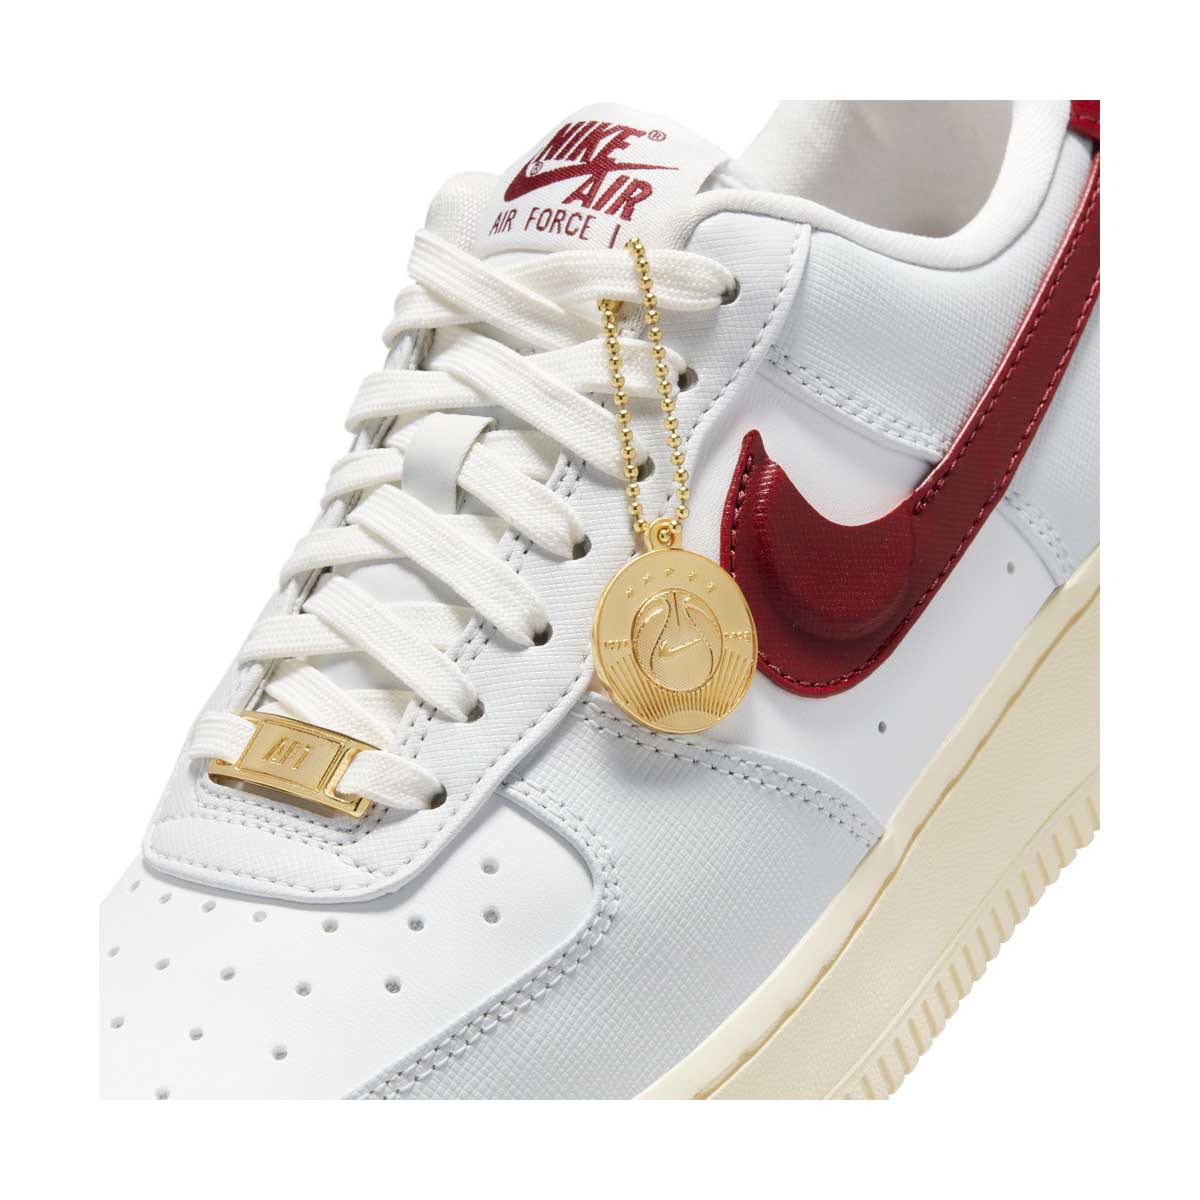 Nike Women's Air Force 1 High SE Shoes in White, Size: 7.5 | DO9460-100